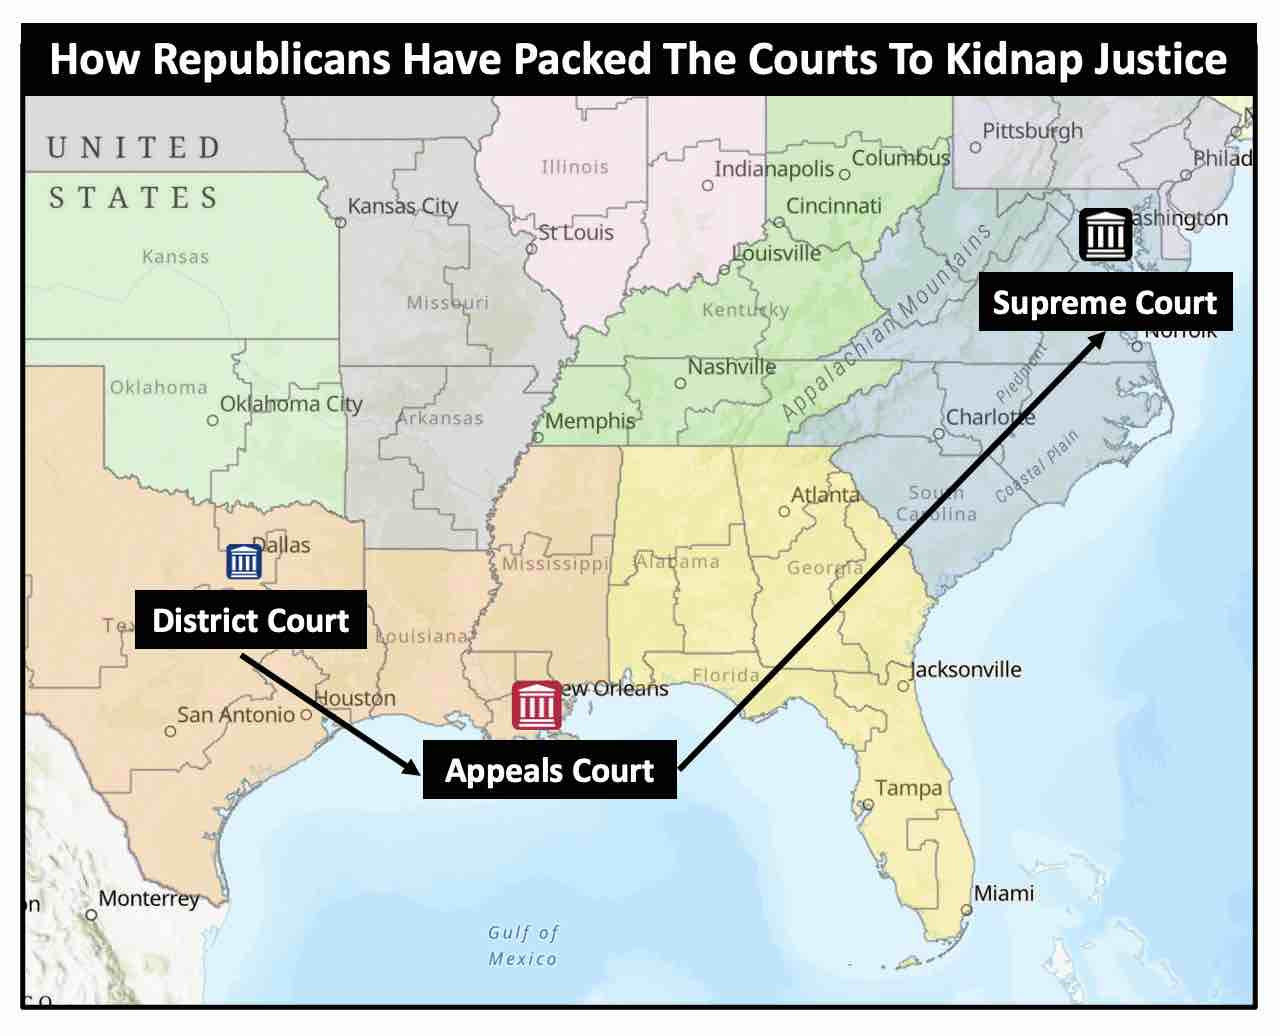 Republicans pack the courts and then use judge and forum shopping to get laws passed.